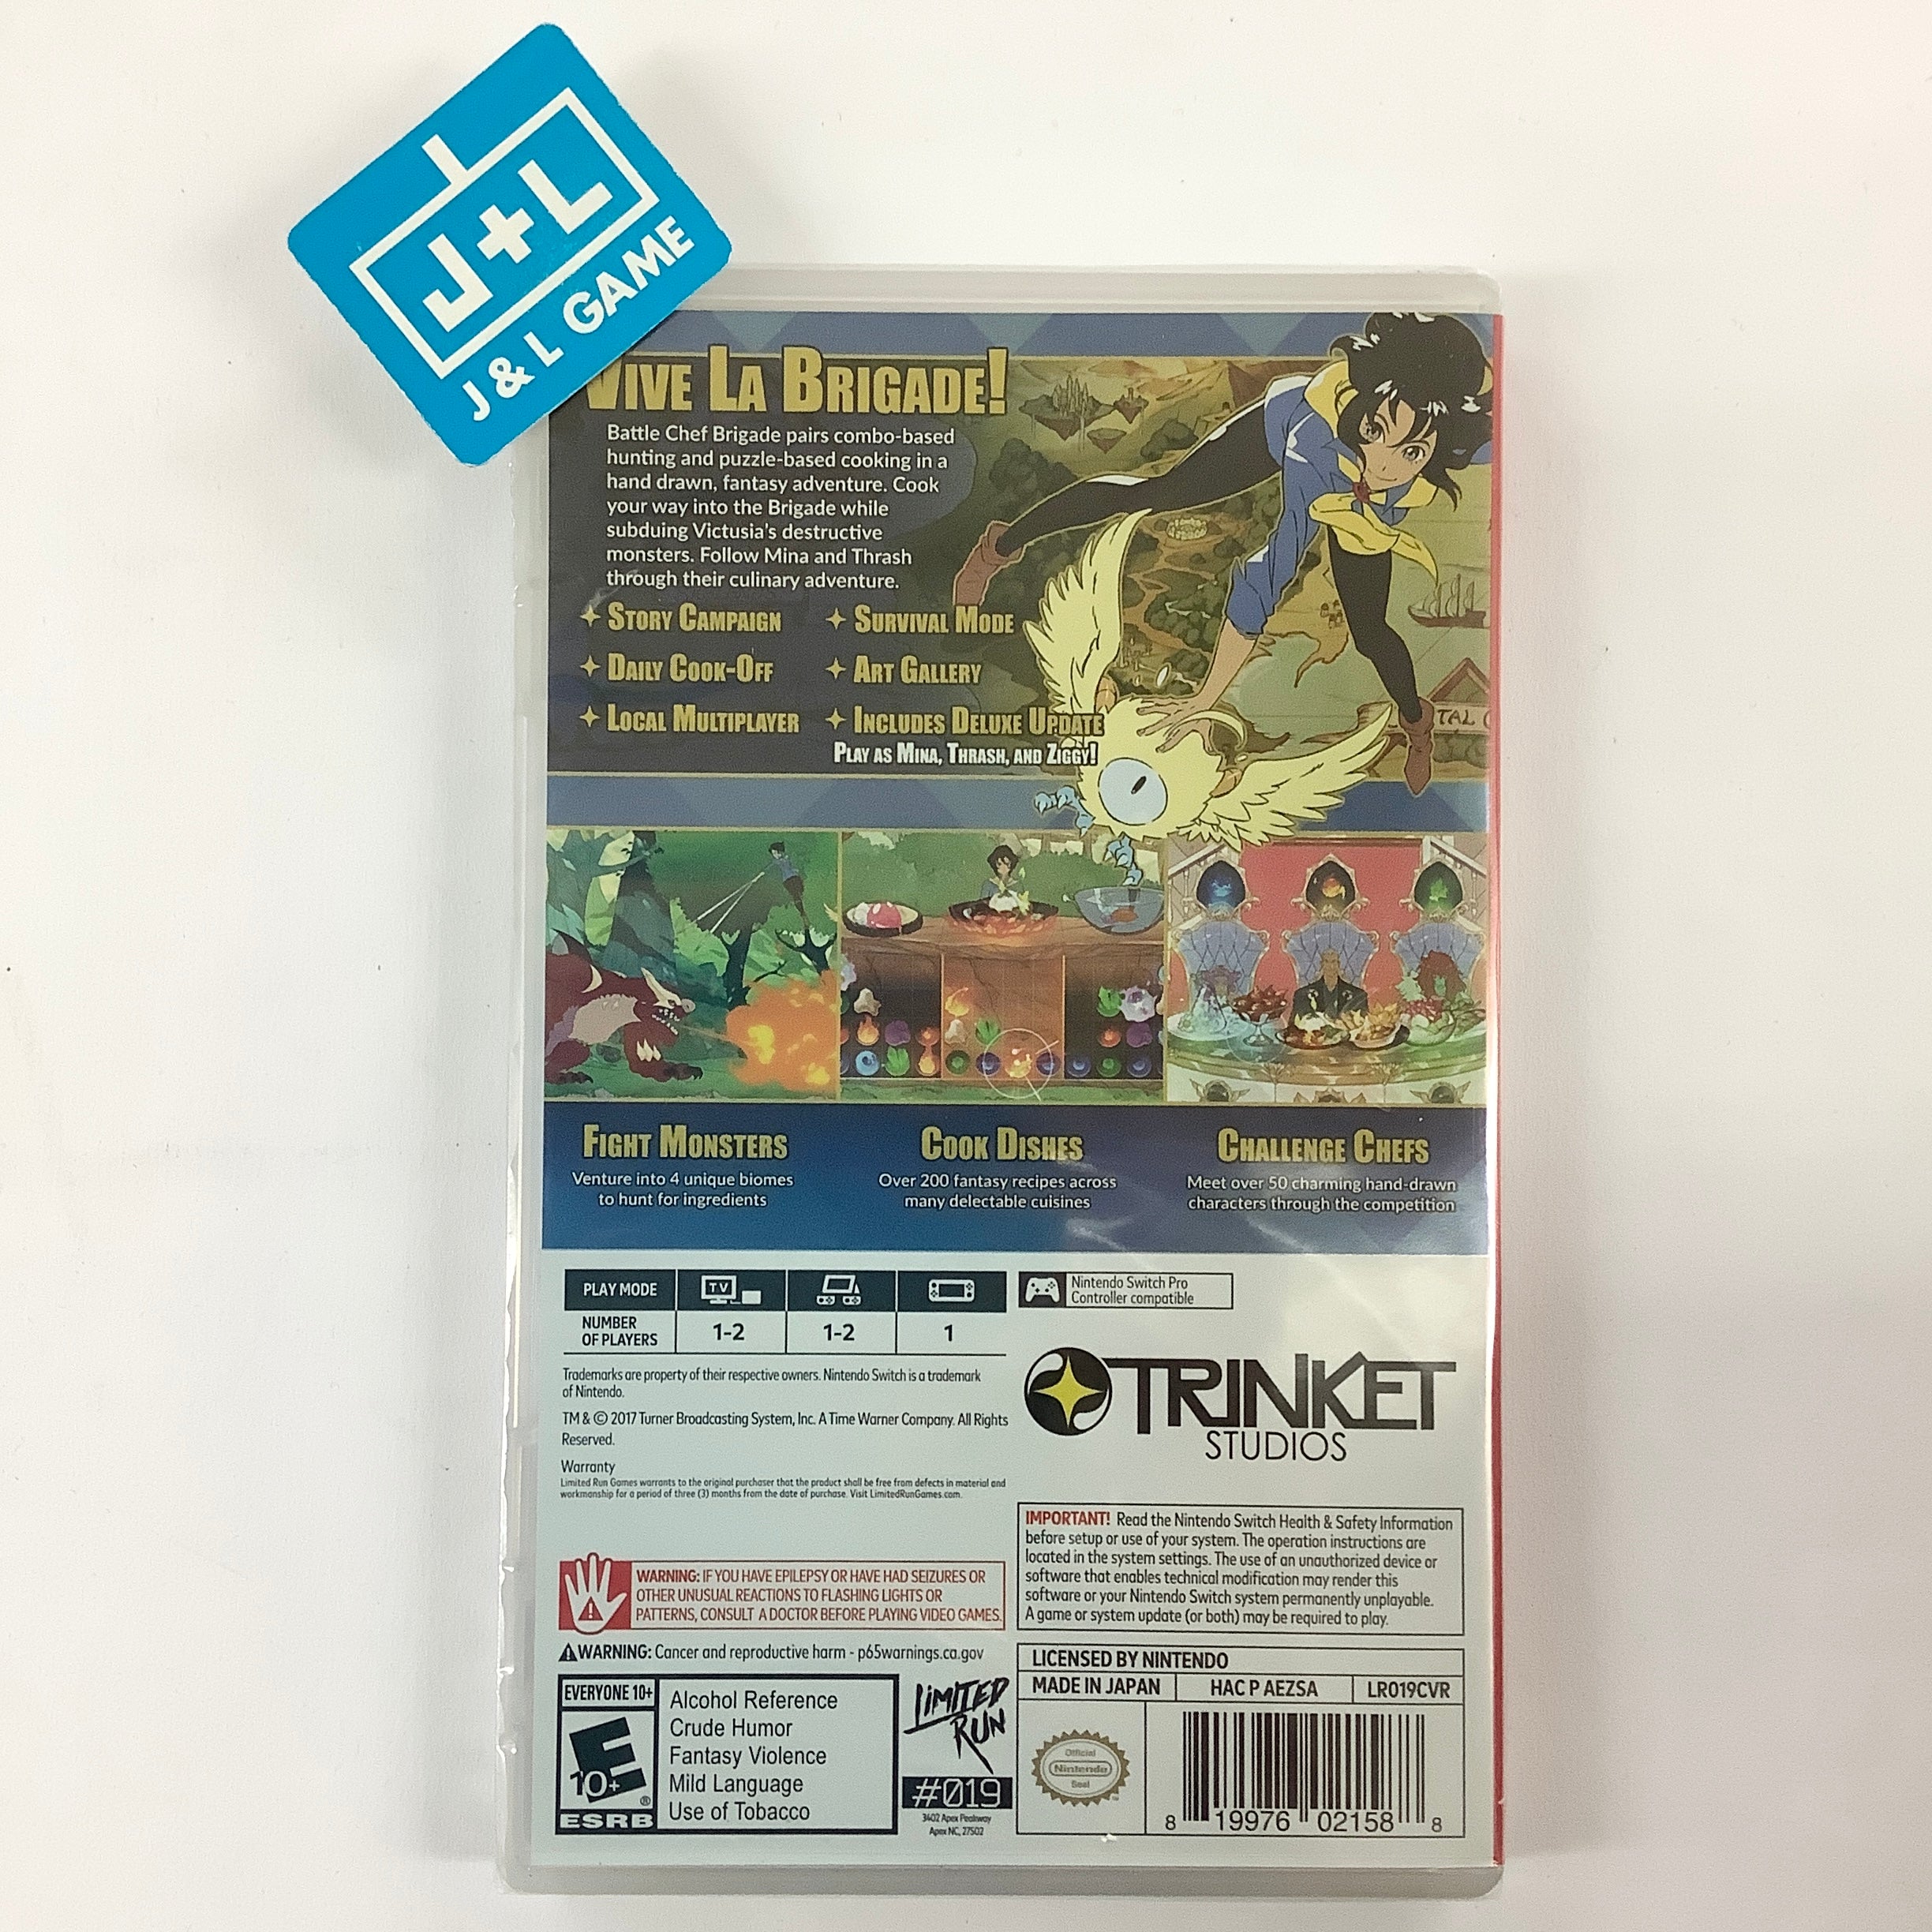 Battle Chef Brigade Deluxe (Limited Run #019) - (NSW) Nintendo Switch Video Games Limited Run Games   